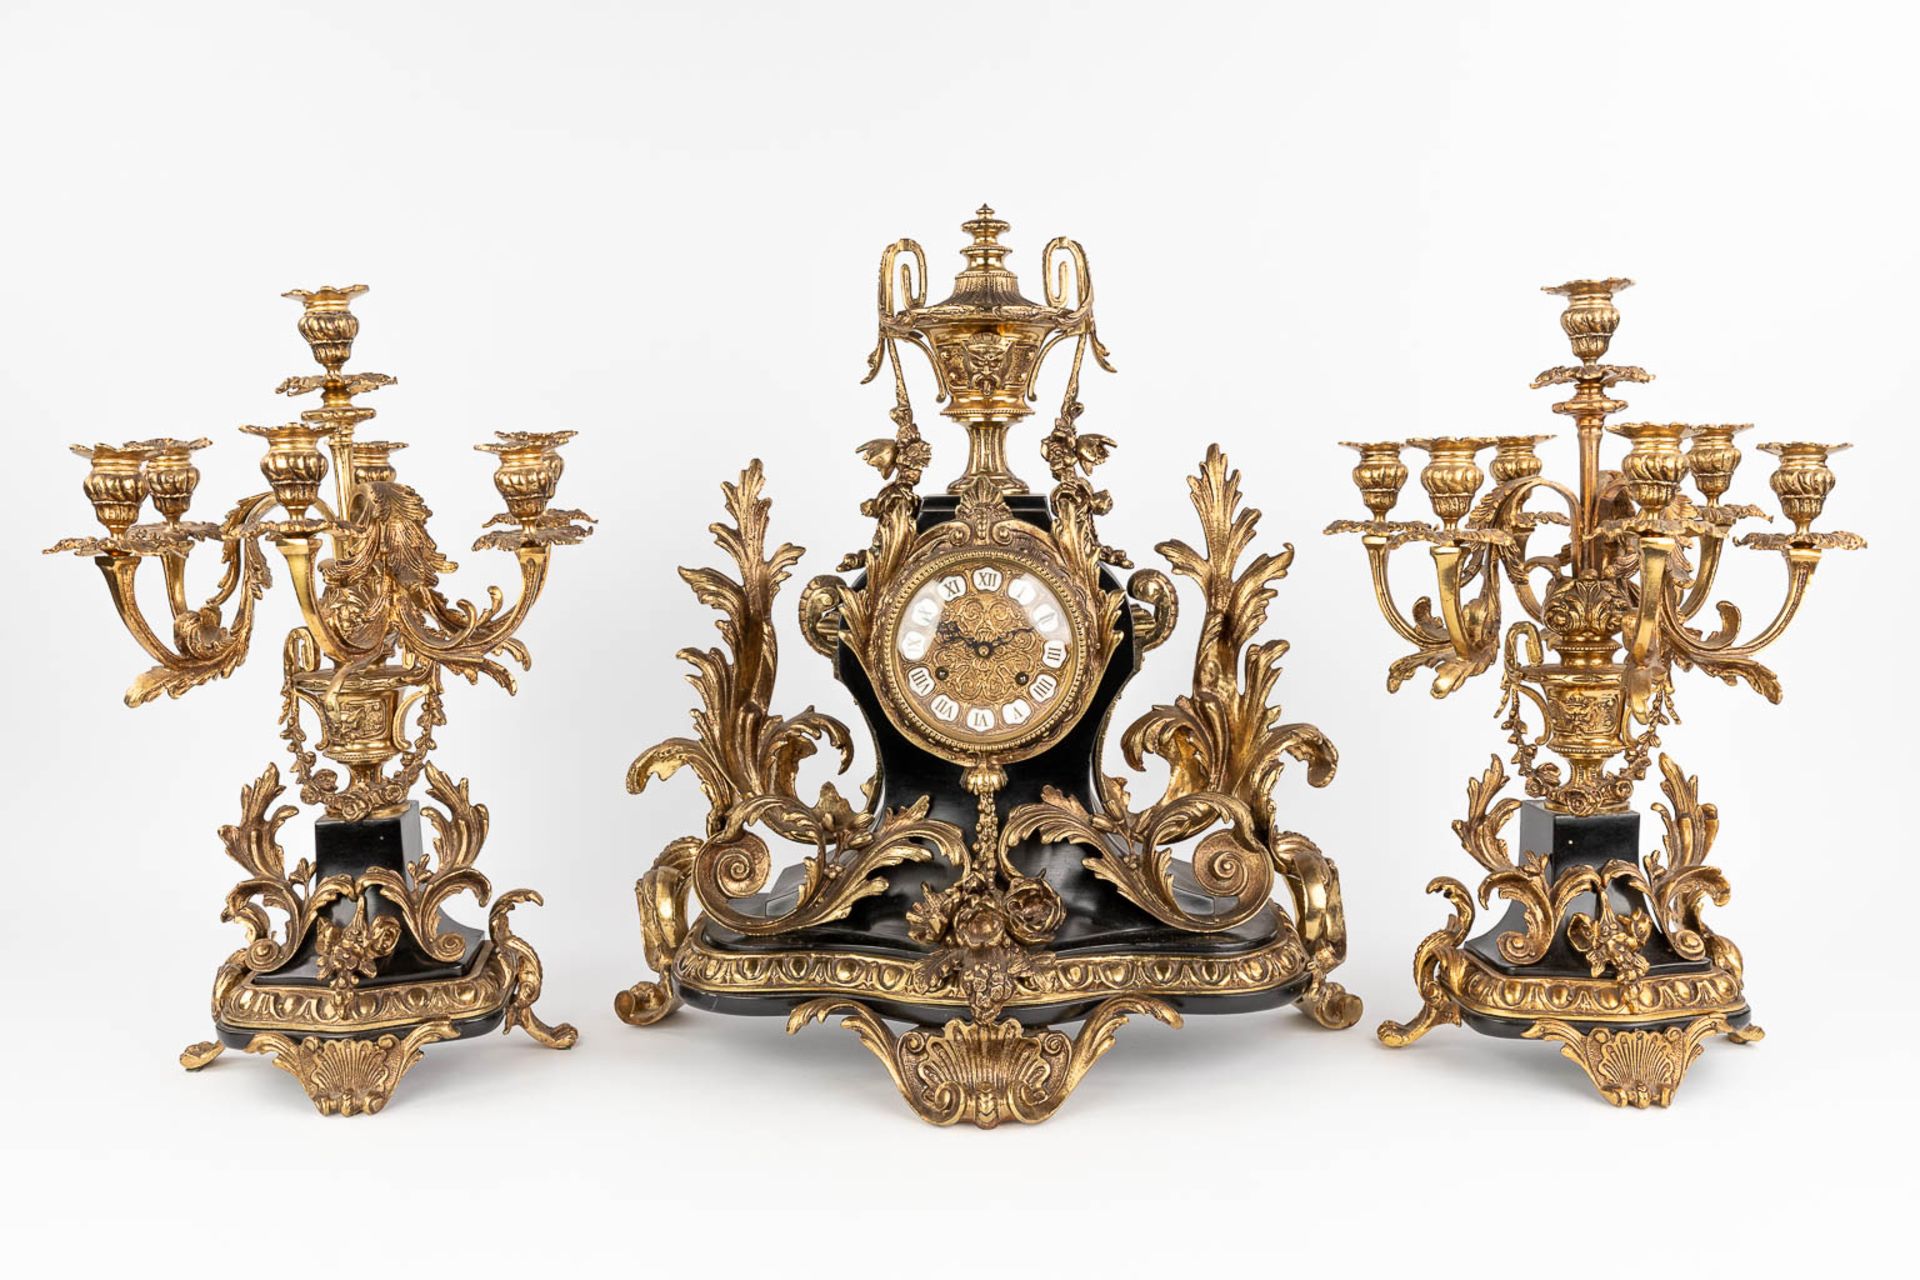 A three-piece mantle garniture clock and candelabra, Louis XV style. Circa 1970. (D:25 x W:51 x H:55 - Image 3 of 14